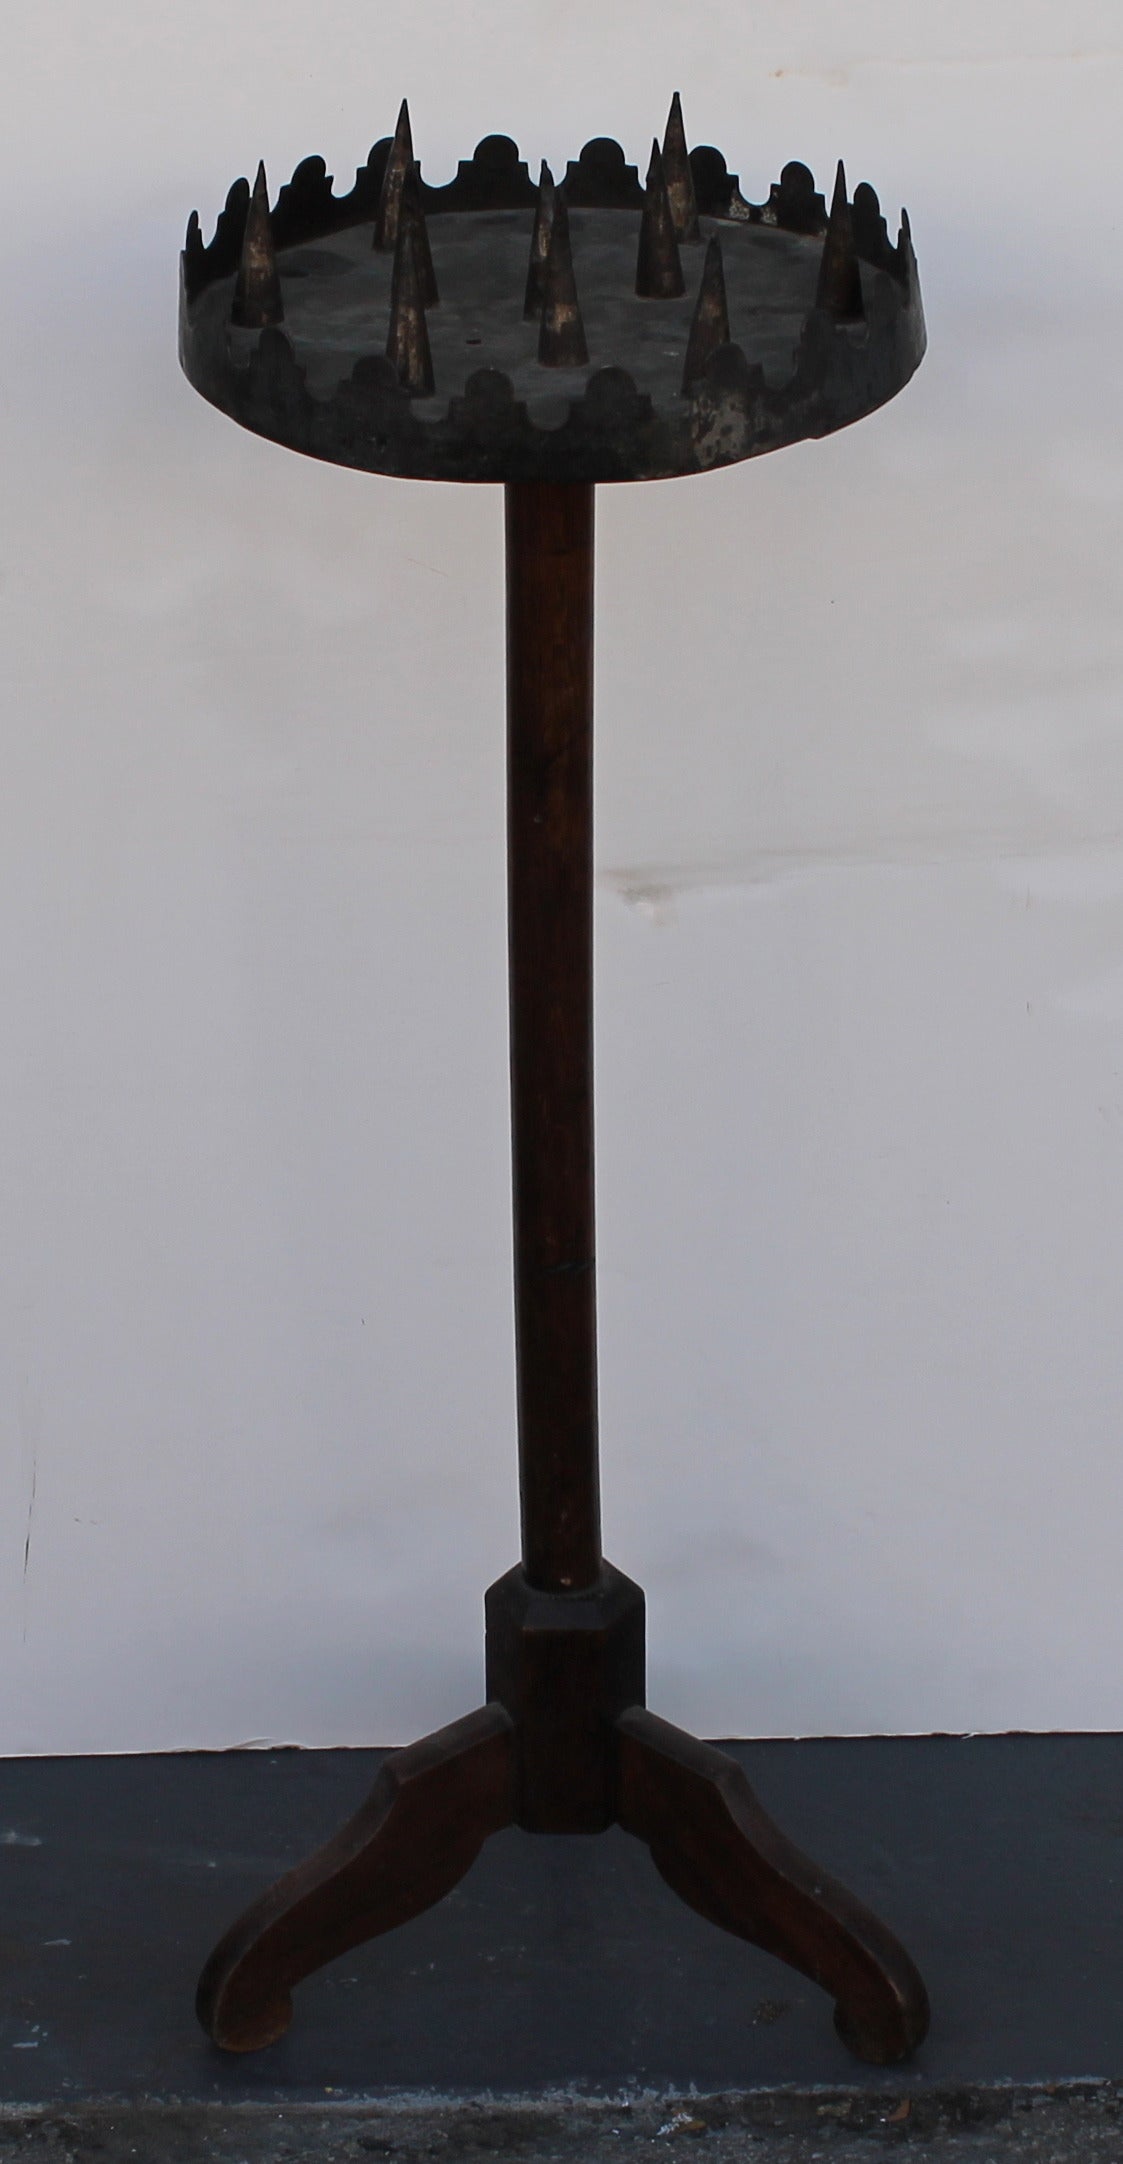 This is a early 18th century New England monumental floor candle stand is from circa 1700-1720. It is a handmade of tin the entire top and the base is hand-carved wood. This is very rare to even find as most are in private collections. The condition